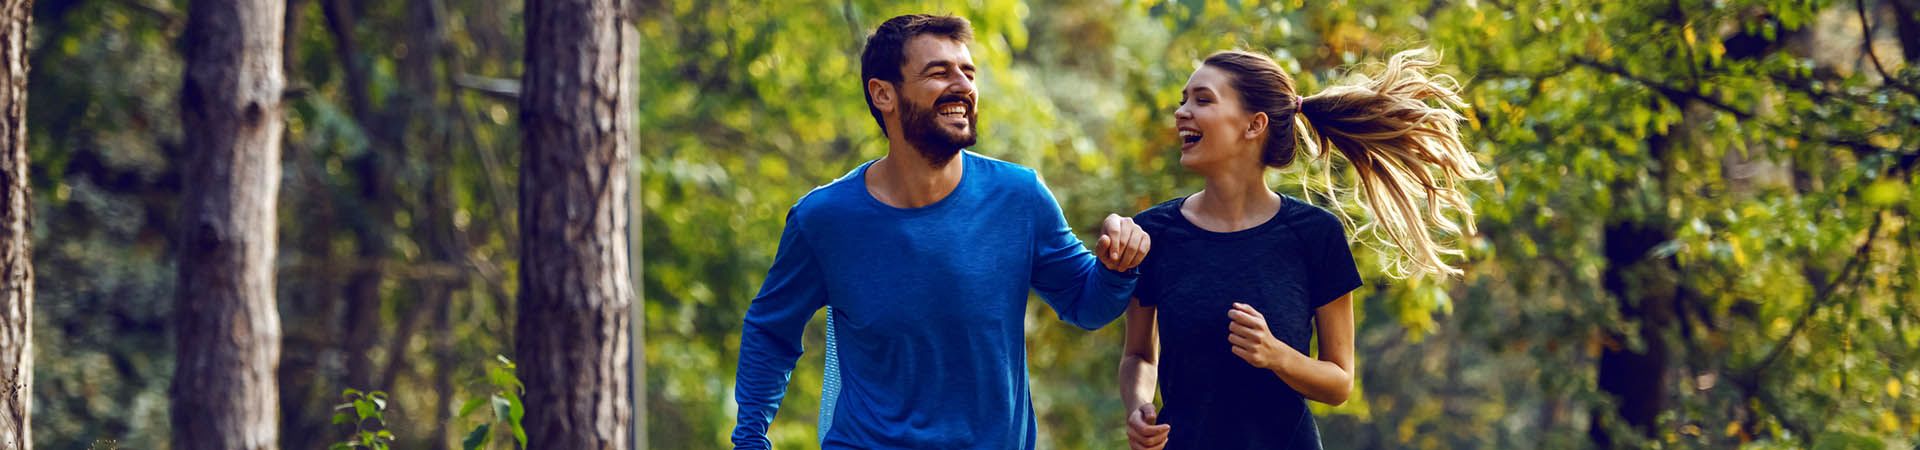 Improving running technique - Friends jogging together in the forest.